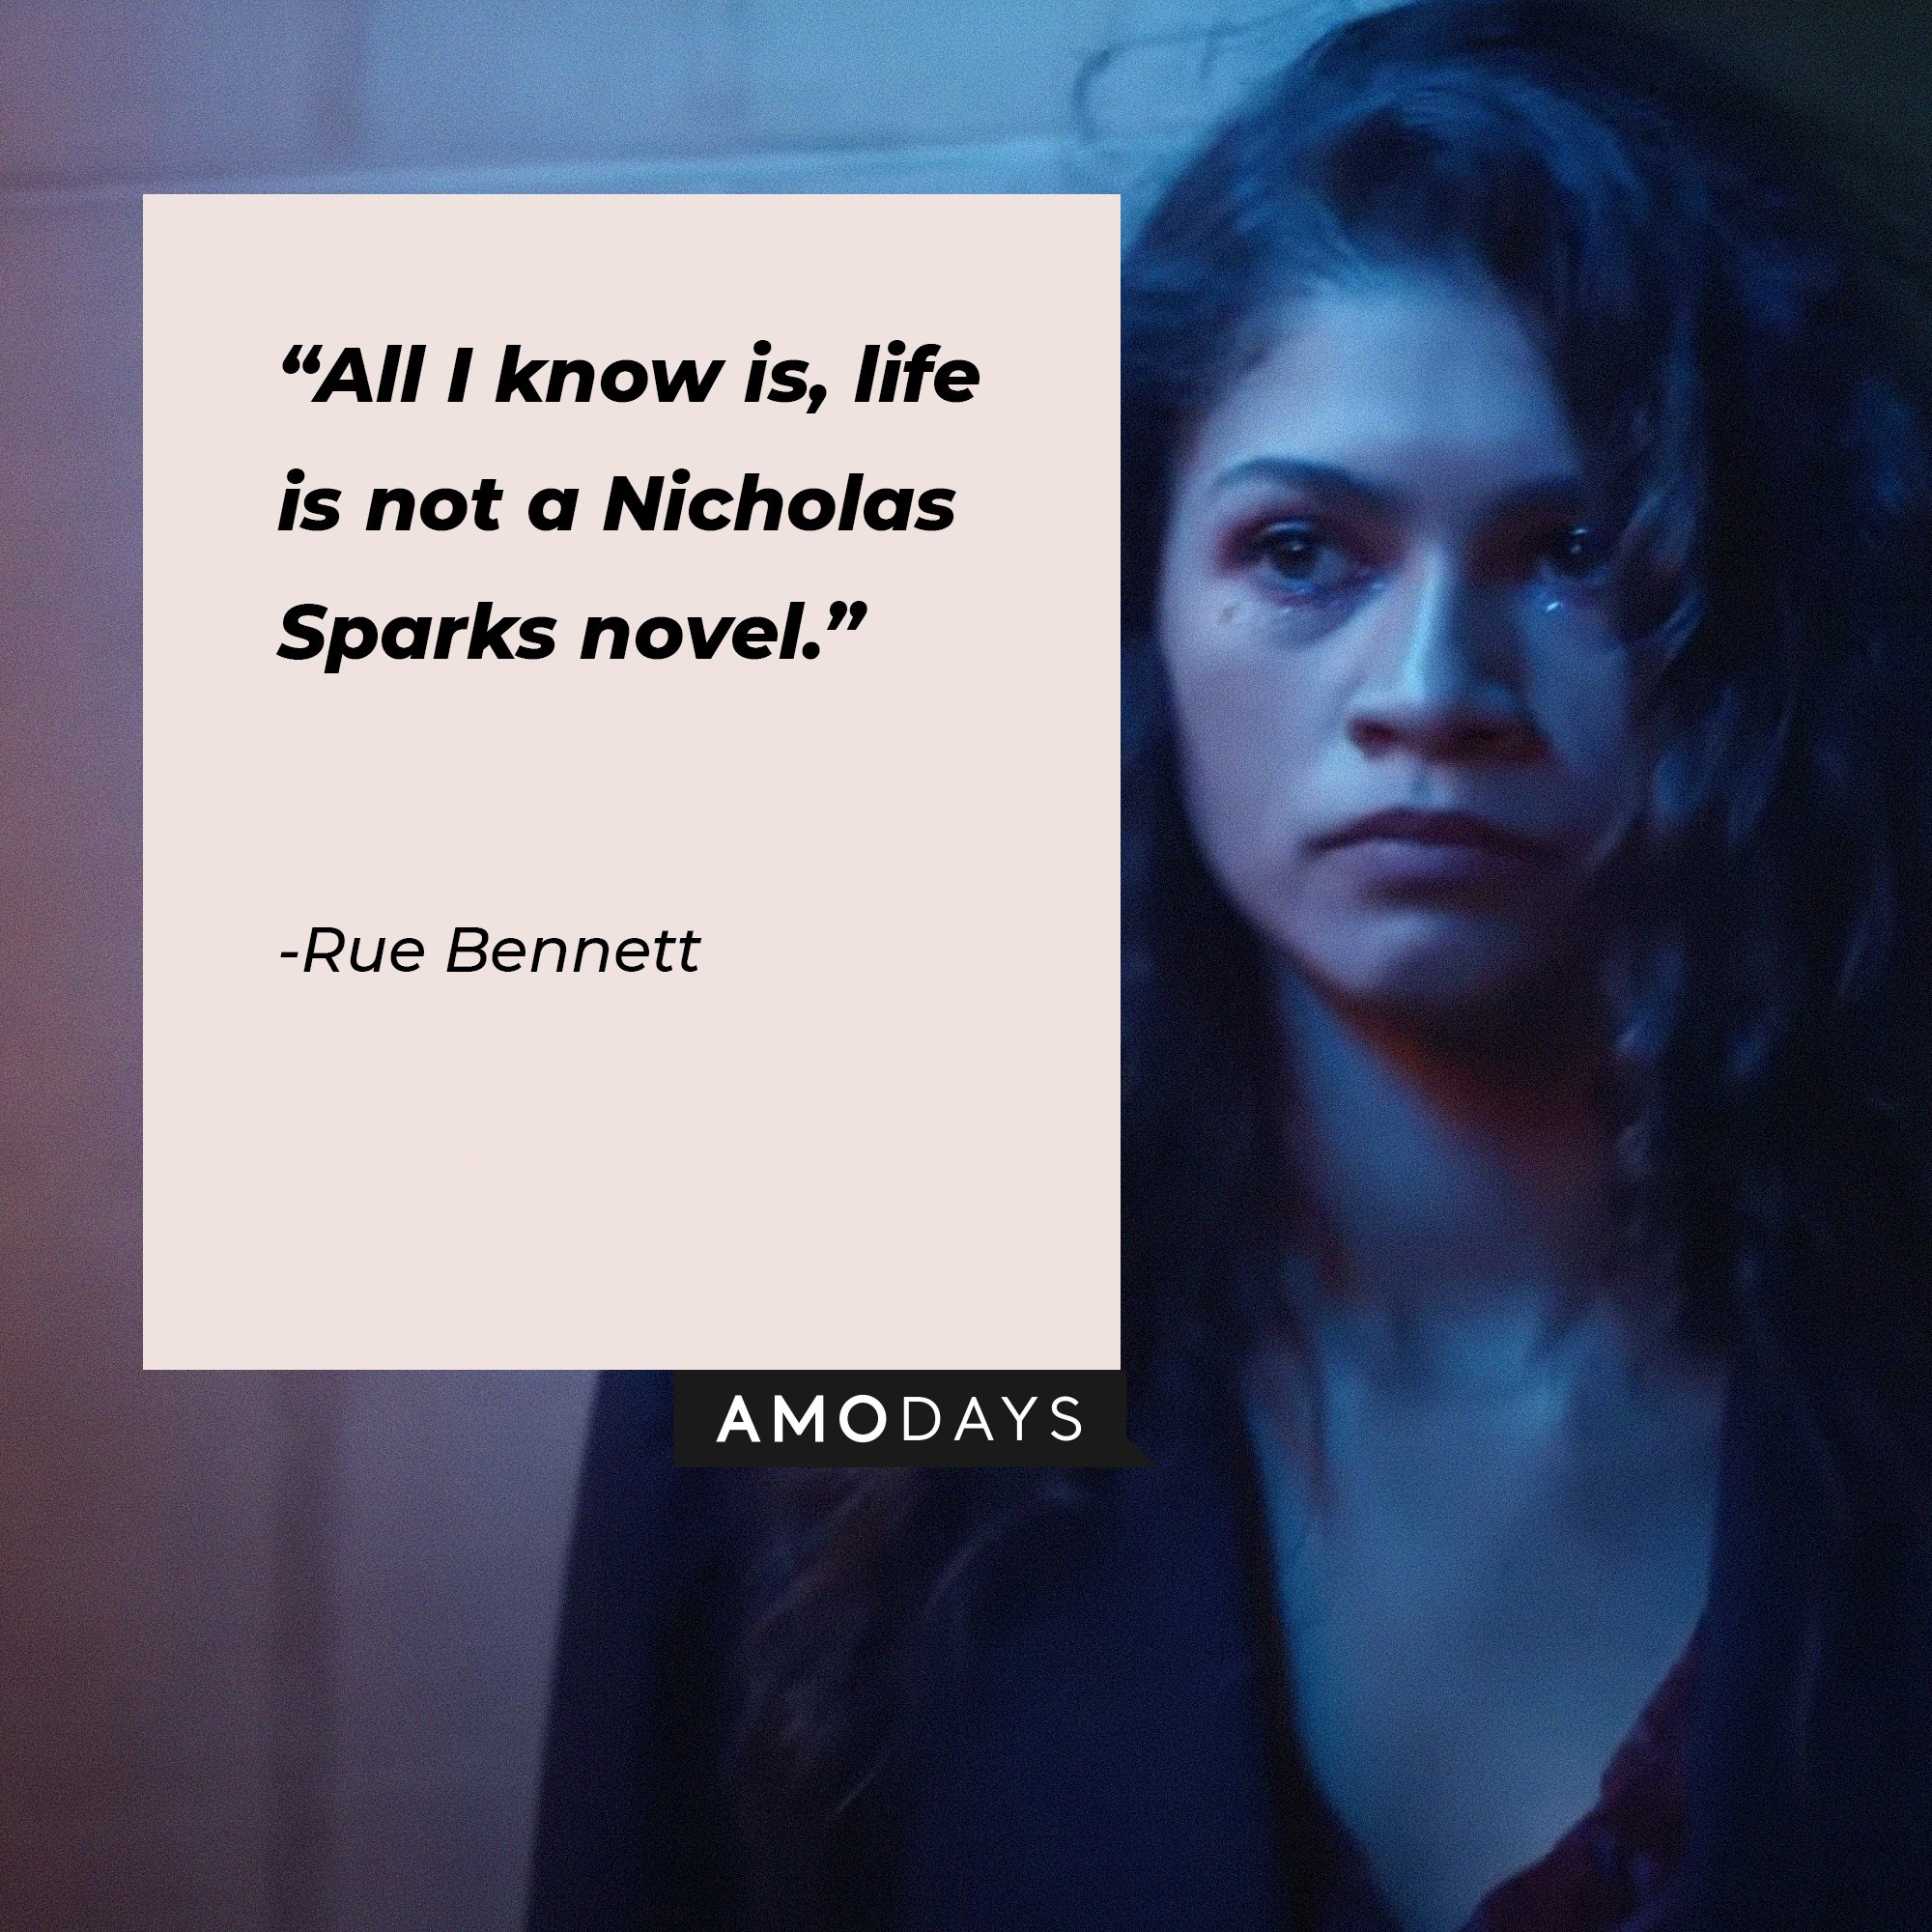 Rue Bennett’s quote: “All I know is, life is not a Nicholas Sparks novel.” |  Image: AmoDays